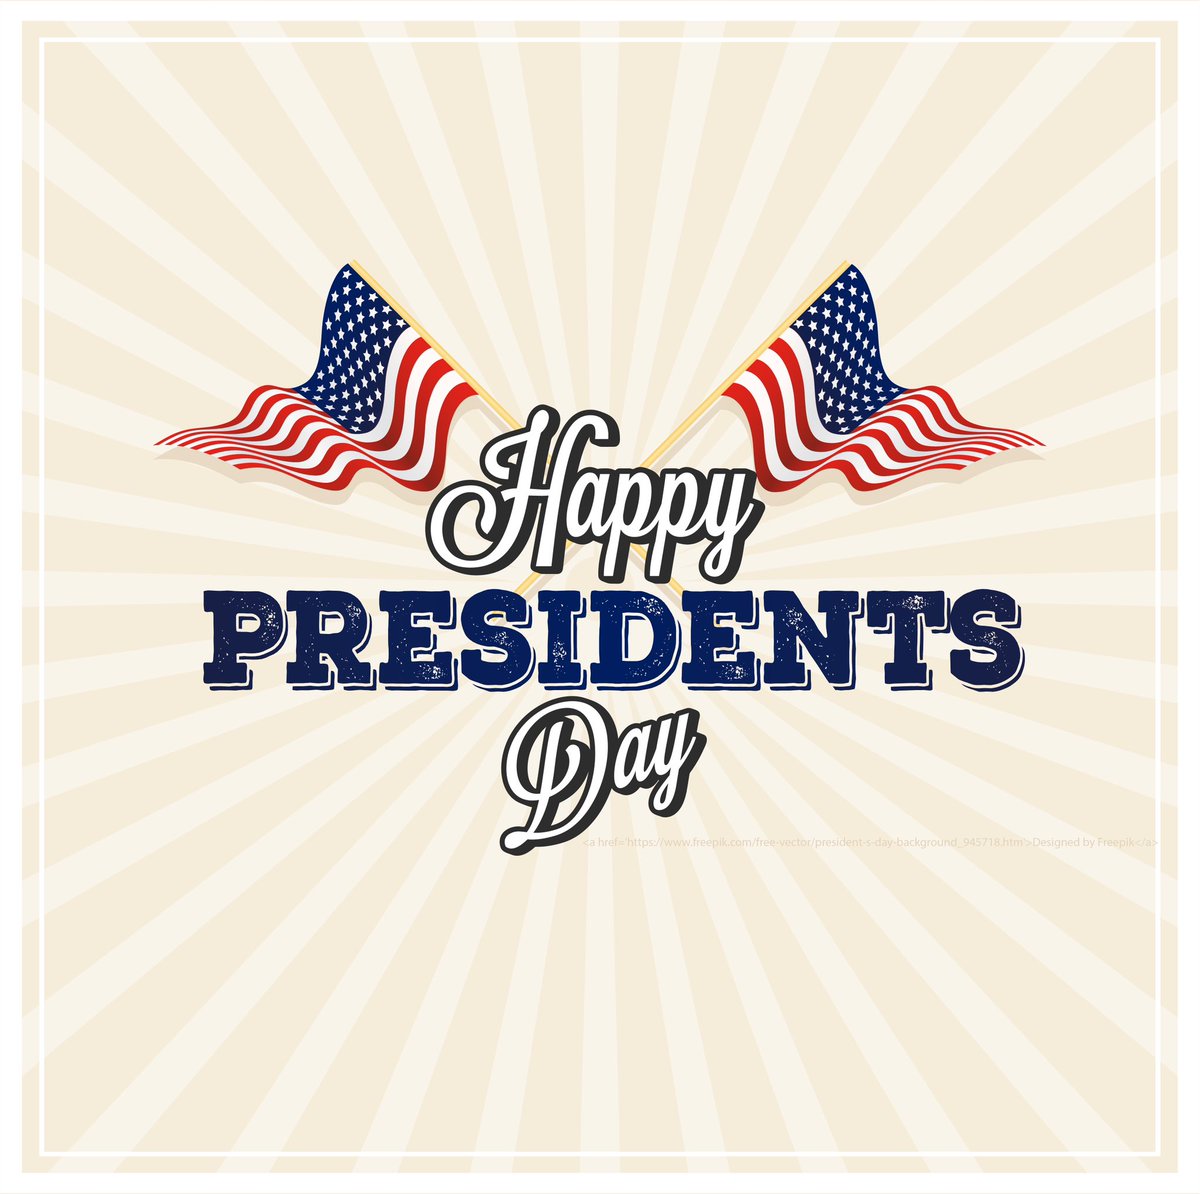 “There are no easy answers, but there are simple answers. We must have the courage to do what we know is morally right.” – Ronald Reagan Happy Presidents Day! 🇺🇸